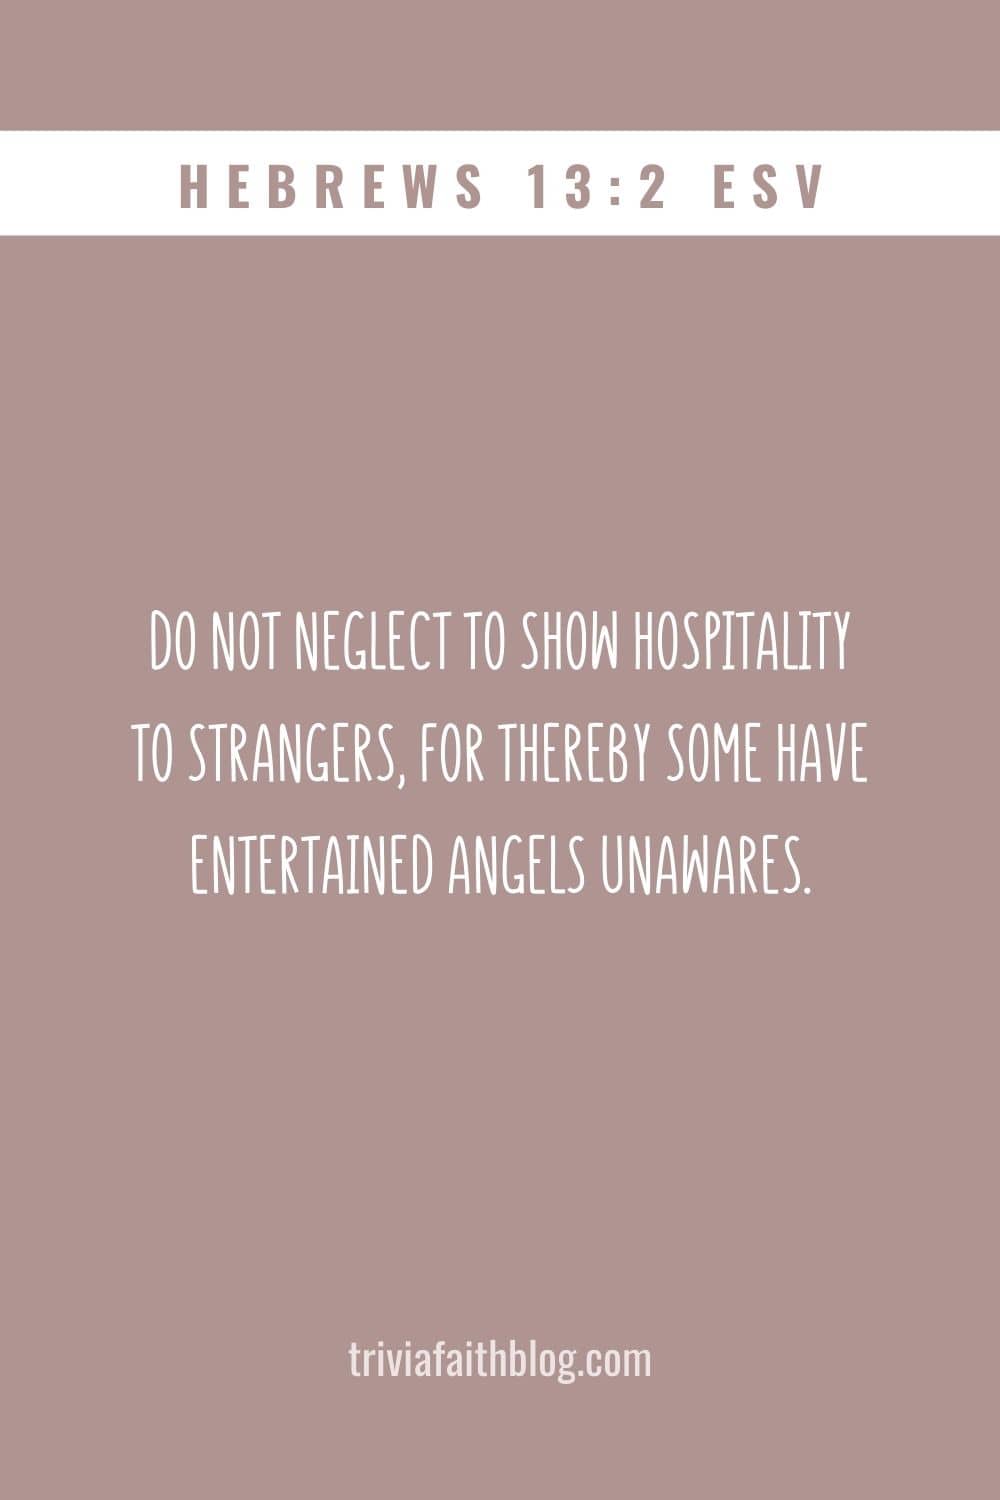 Do not neglect to show hospitality to strangers, for thereby some have entertained angels unawares